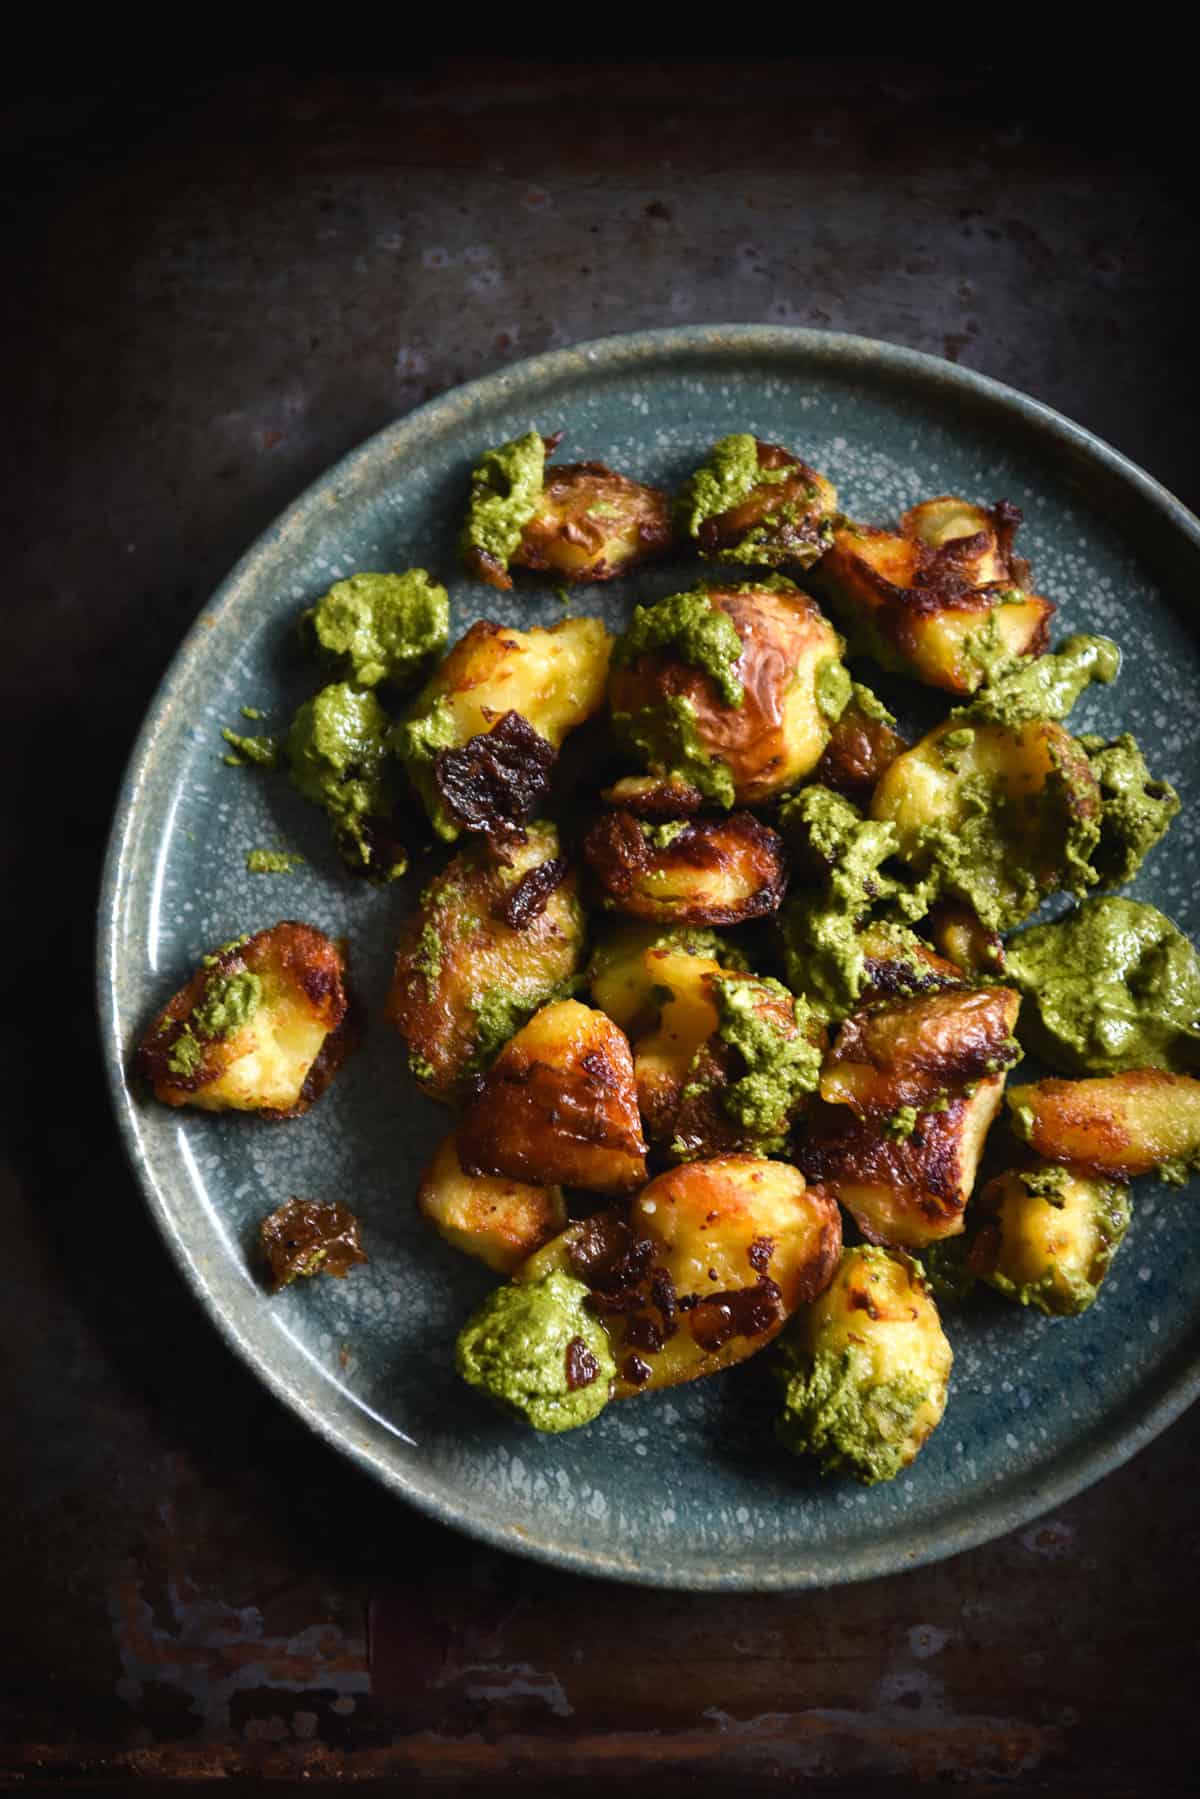 Crispy smashed potatoes with vegan rocket and almond pesto from www.georgeats.com @georgeats